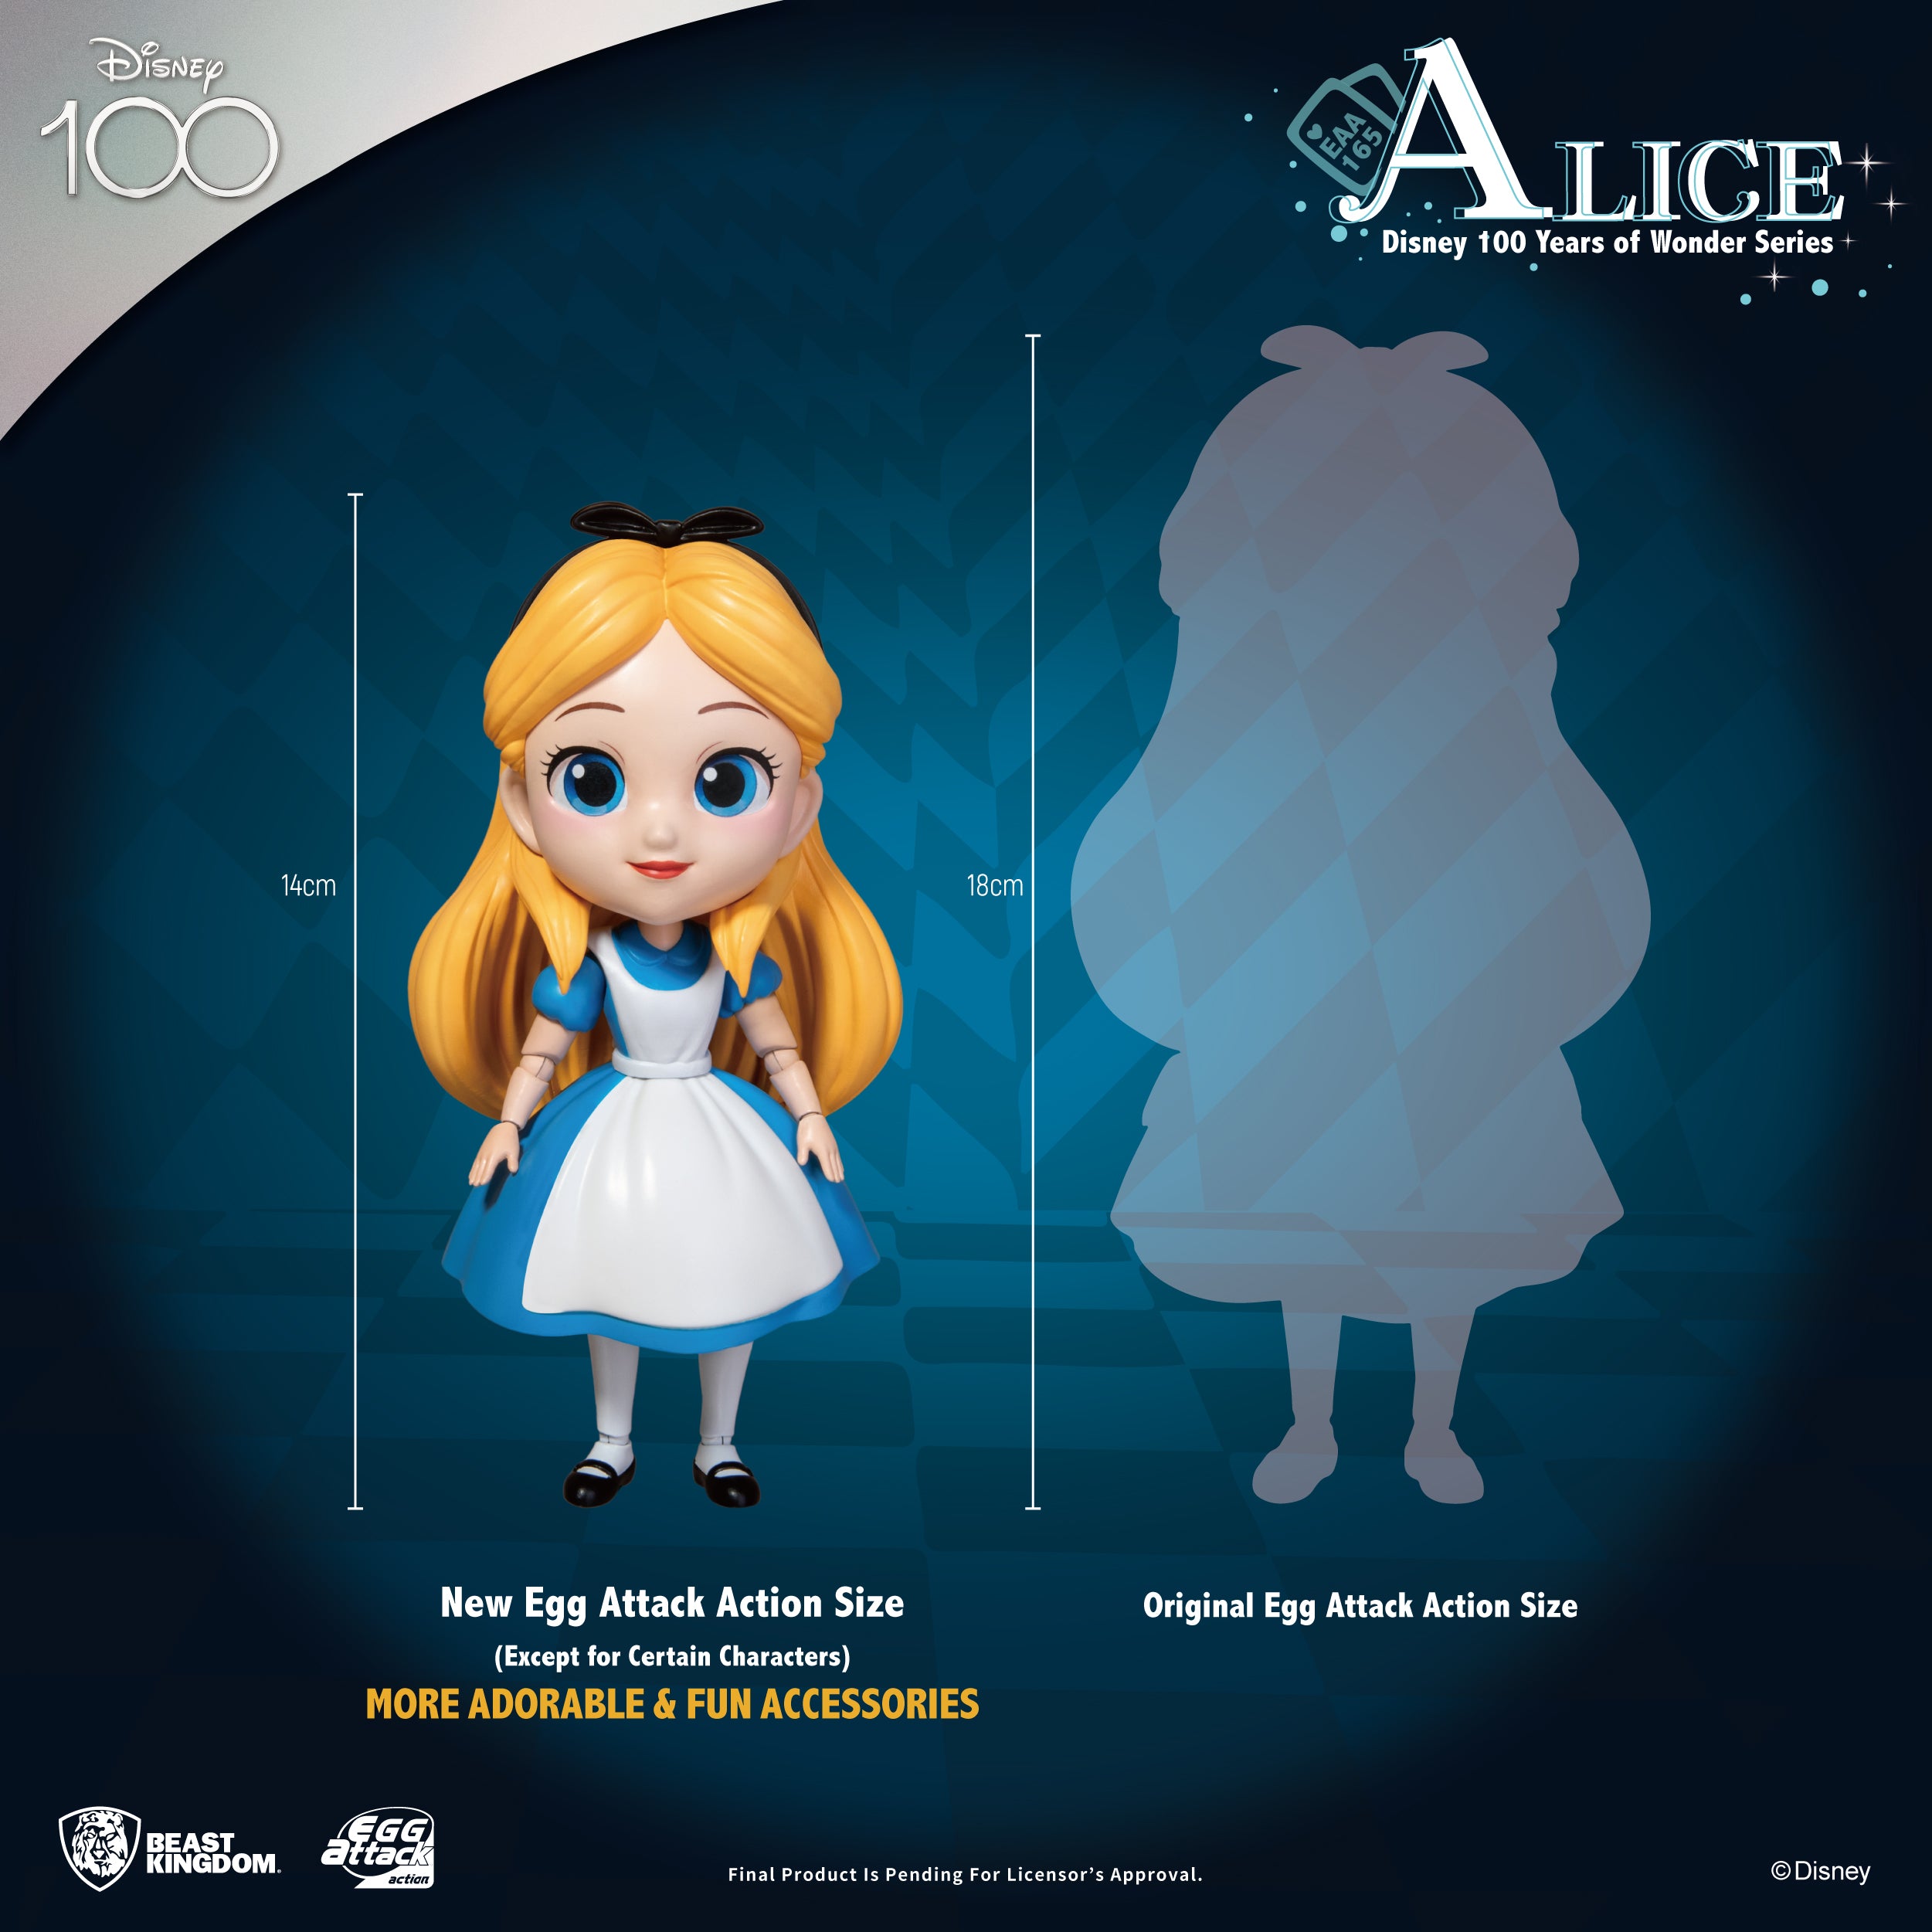 Alice in Wonderland Shirts, Toys, Figurines & More